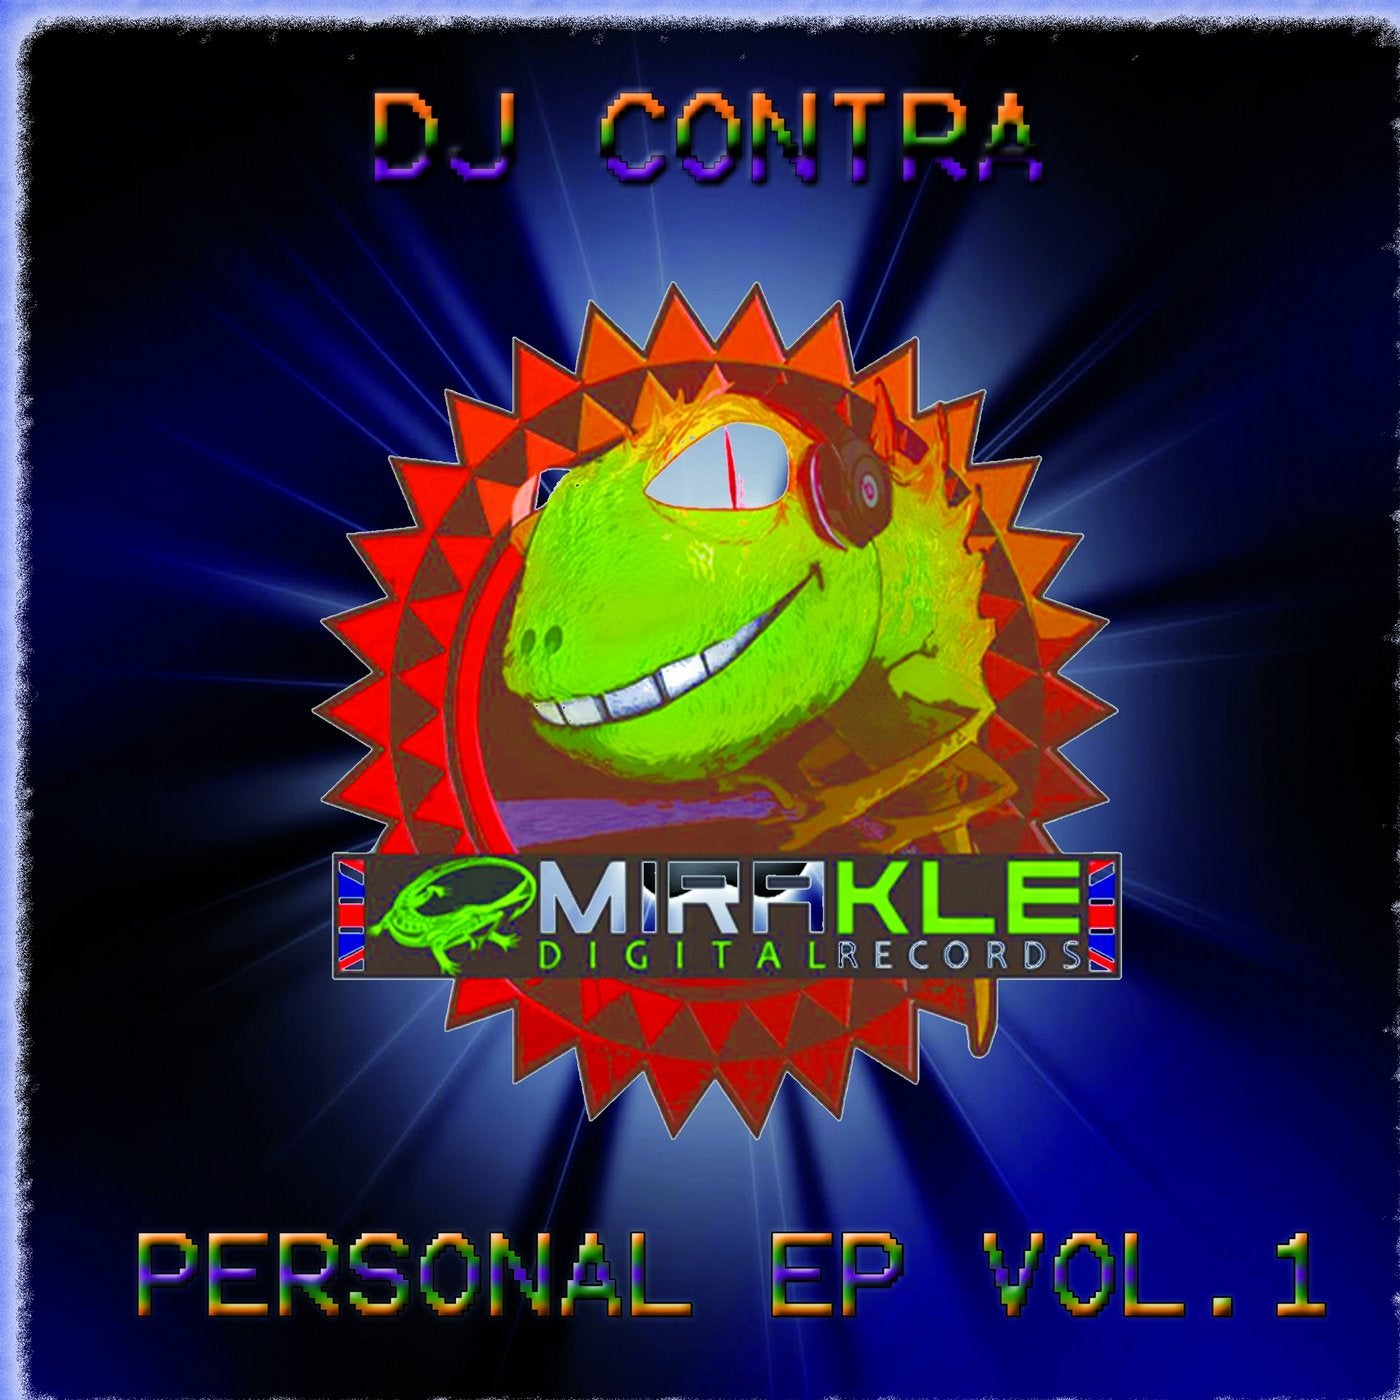 Personal EP, Vol. 1